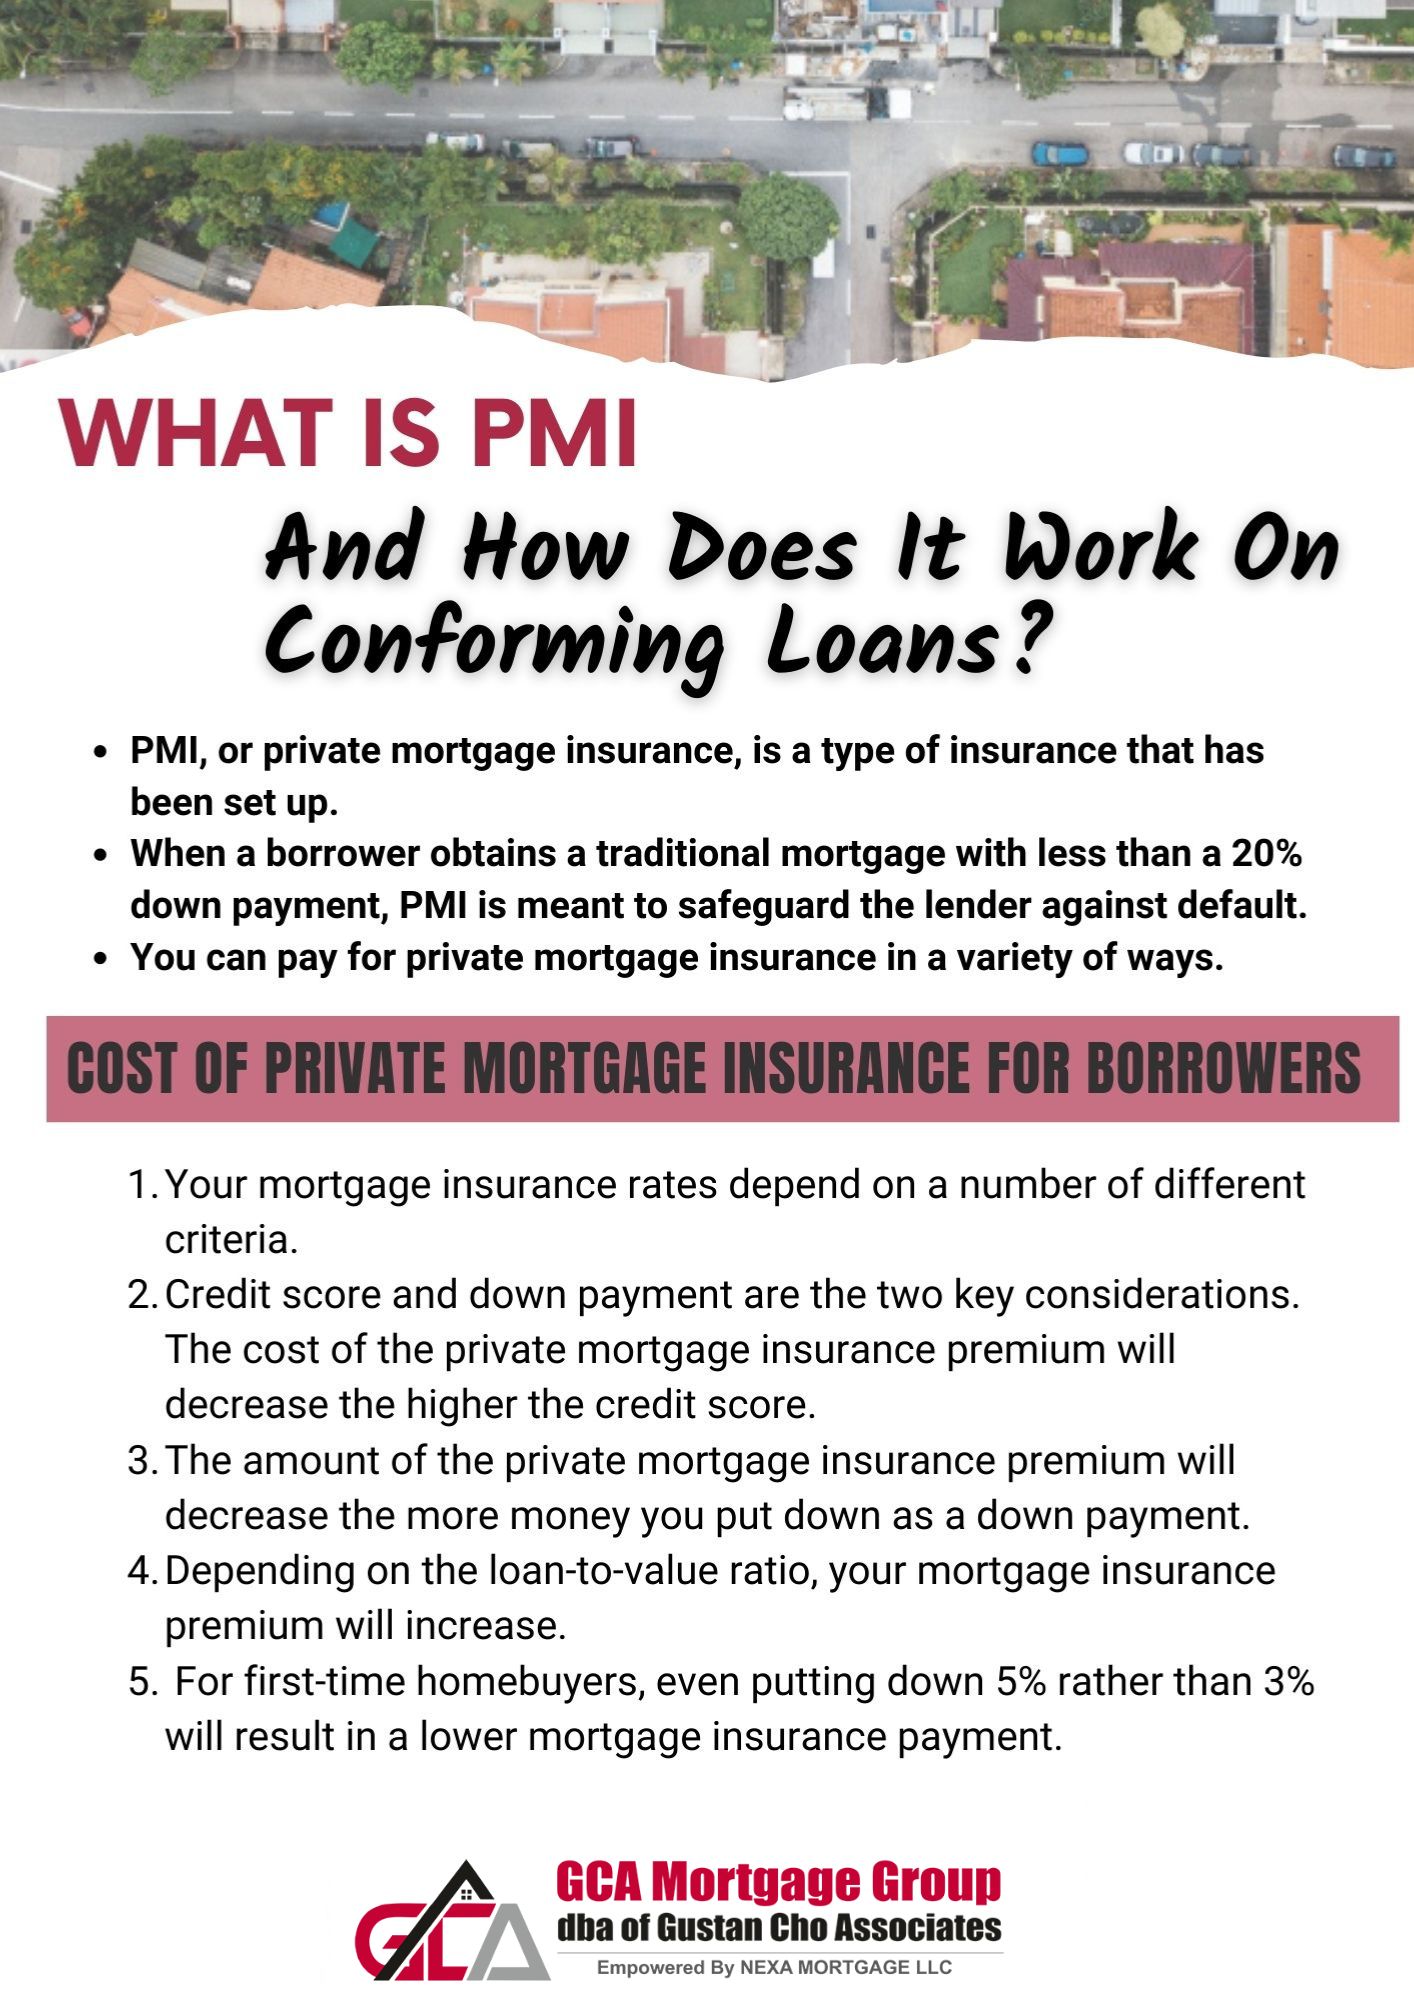 What Is PMI And How Does It Work On Conforming Loans